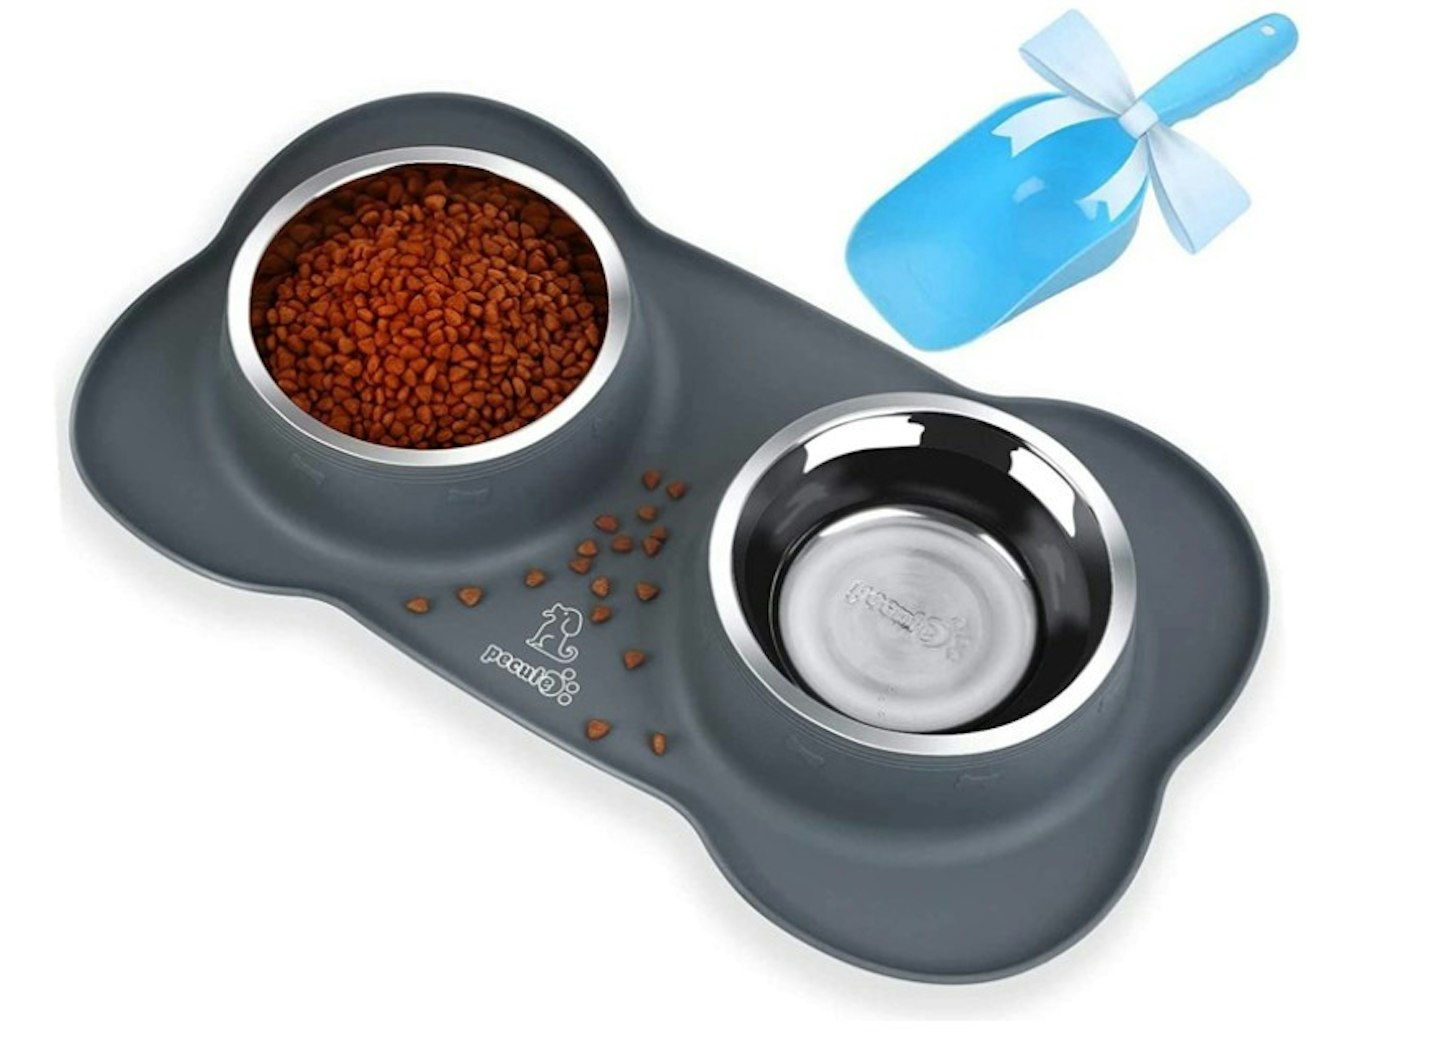 https://images.bauerhosting.com/marketing/sites/22/2023/07/Pecute-Dog-Bowls-Non-Slip-Stainless-Steel-Double-Bowls-Set-with-Non-Spill-Silicone-Mats-Tray-for-Cats-Puppies-Small-Dogs-Water-Food-Feeding.jpg?auto=format&w=1440&q=80